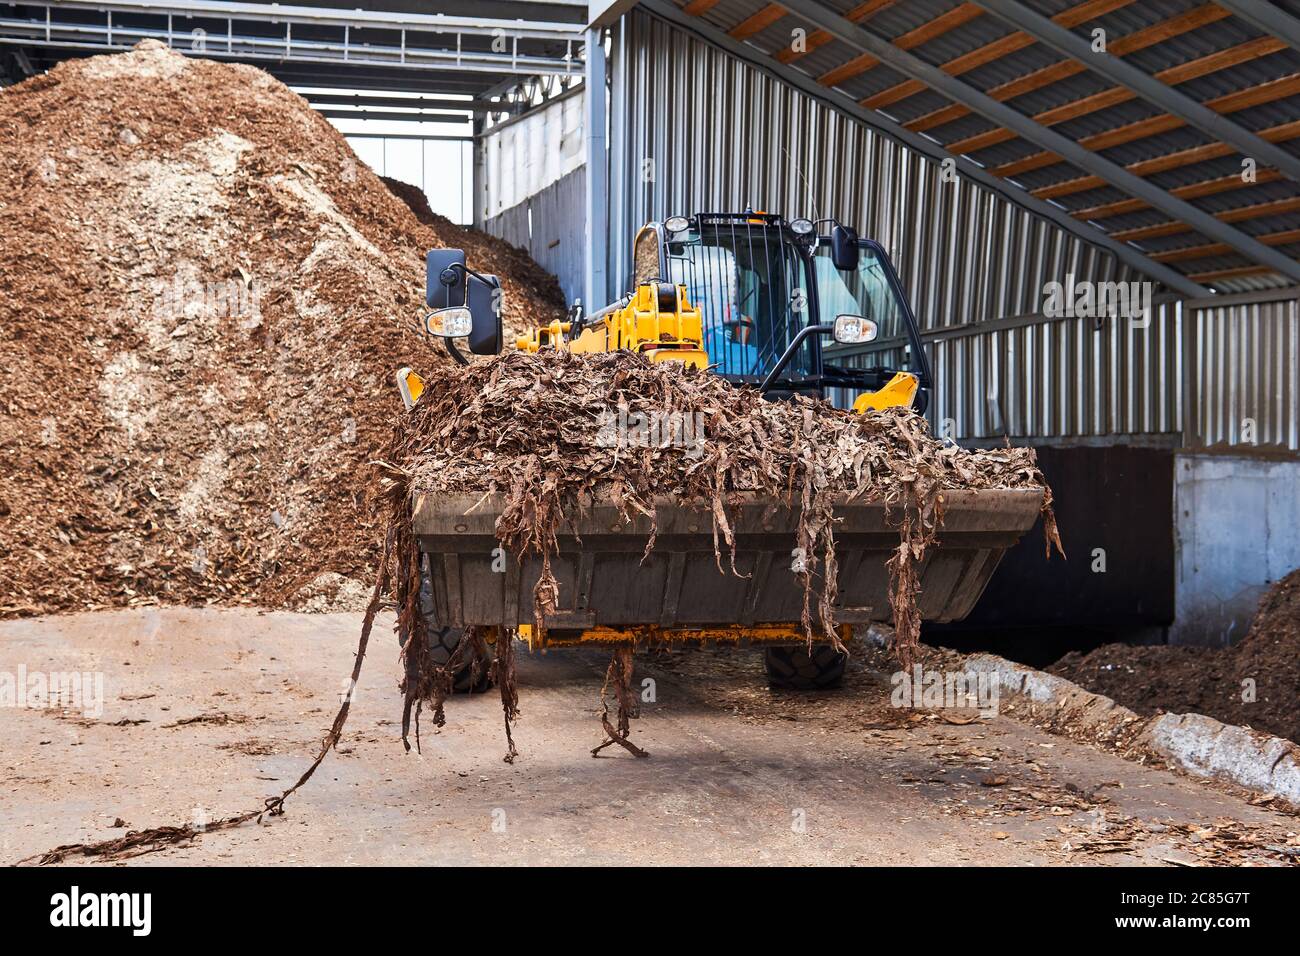 bucket loader moving wood bark in a woodworking industry Stock Photo